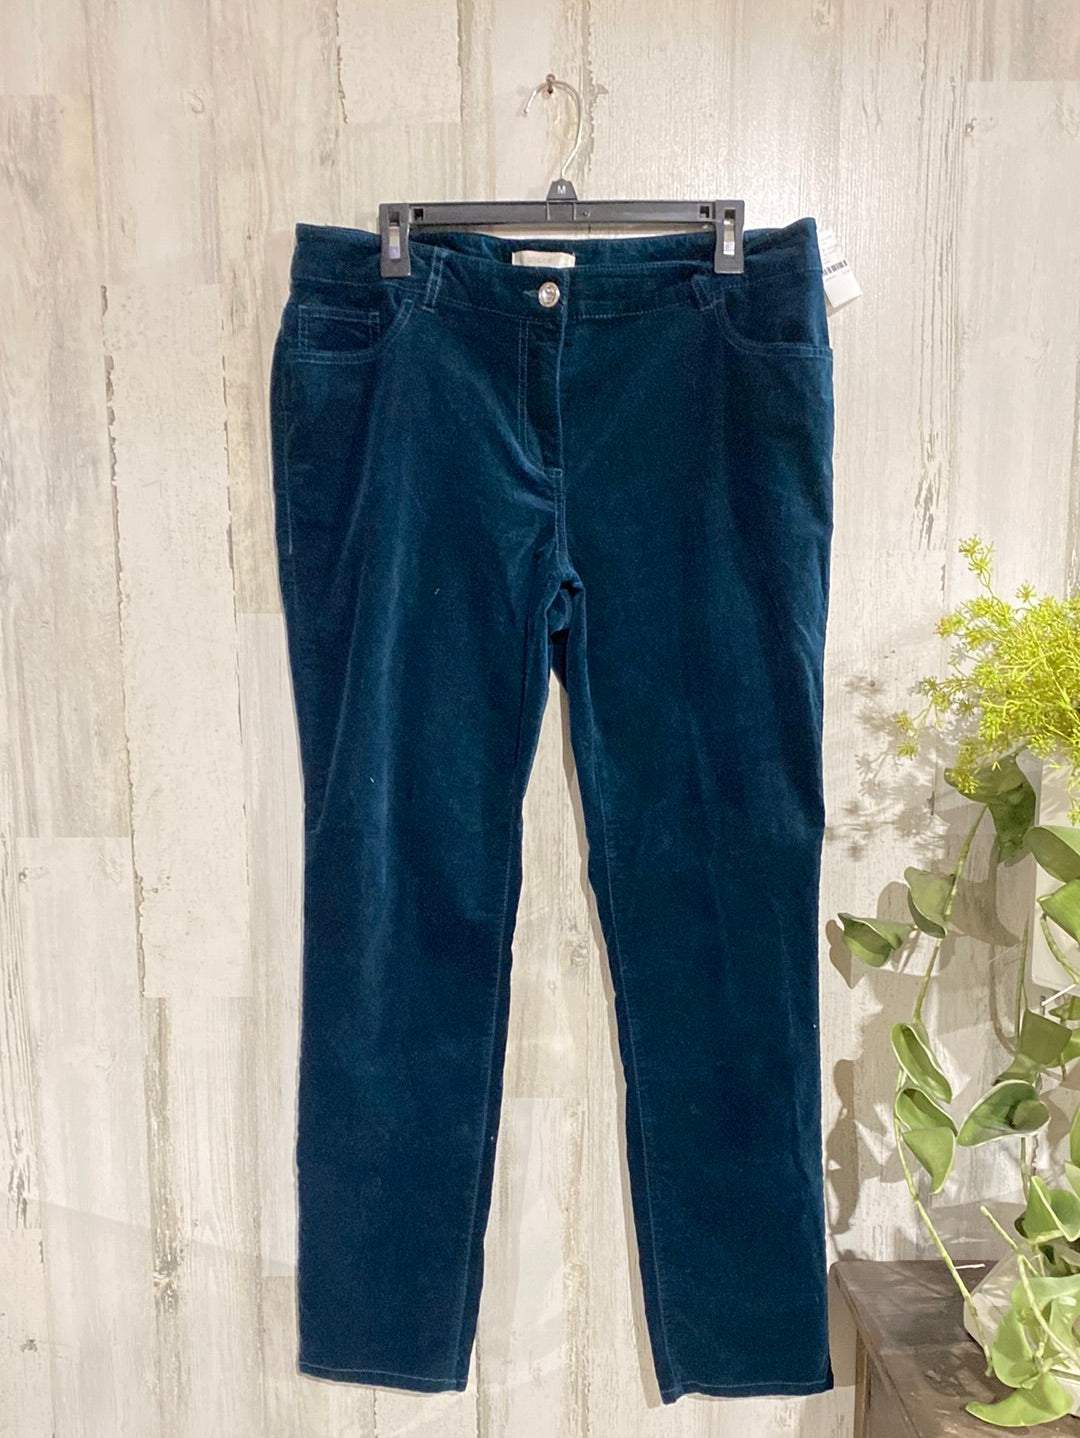 Womens Chico's Teal Blue Velour Pants 2